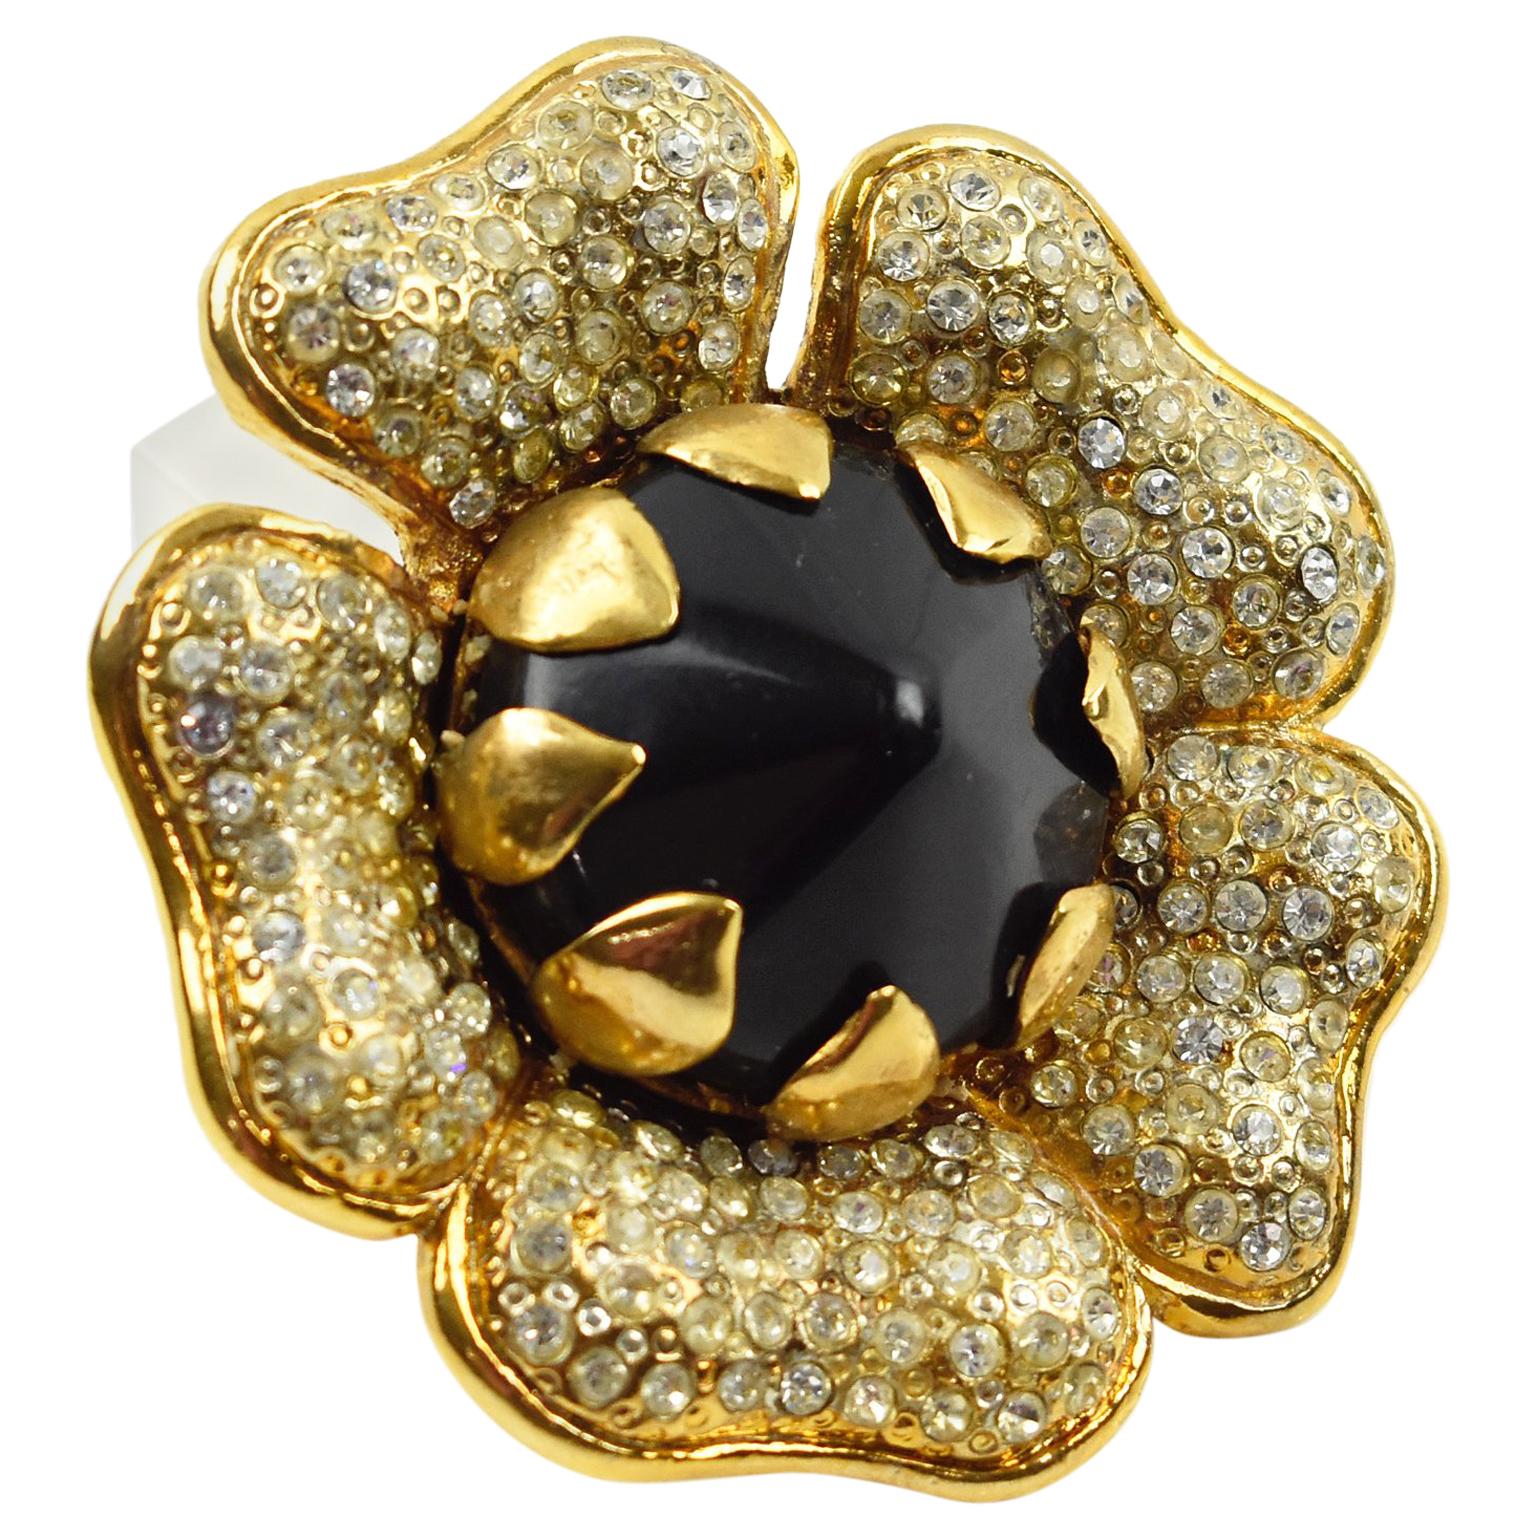 Valentino Signed Jewel Paved and Black Resin Floral Pin Brooch